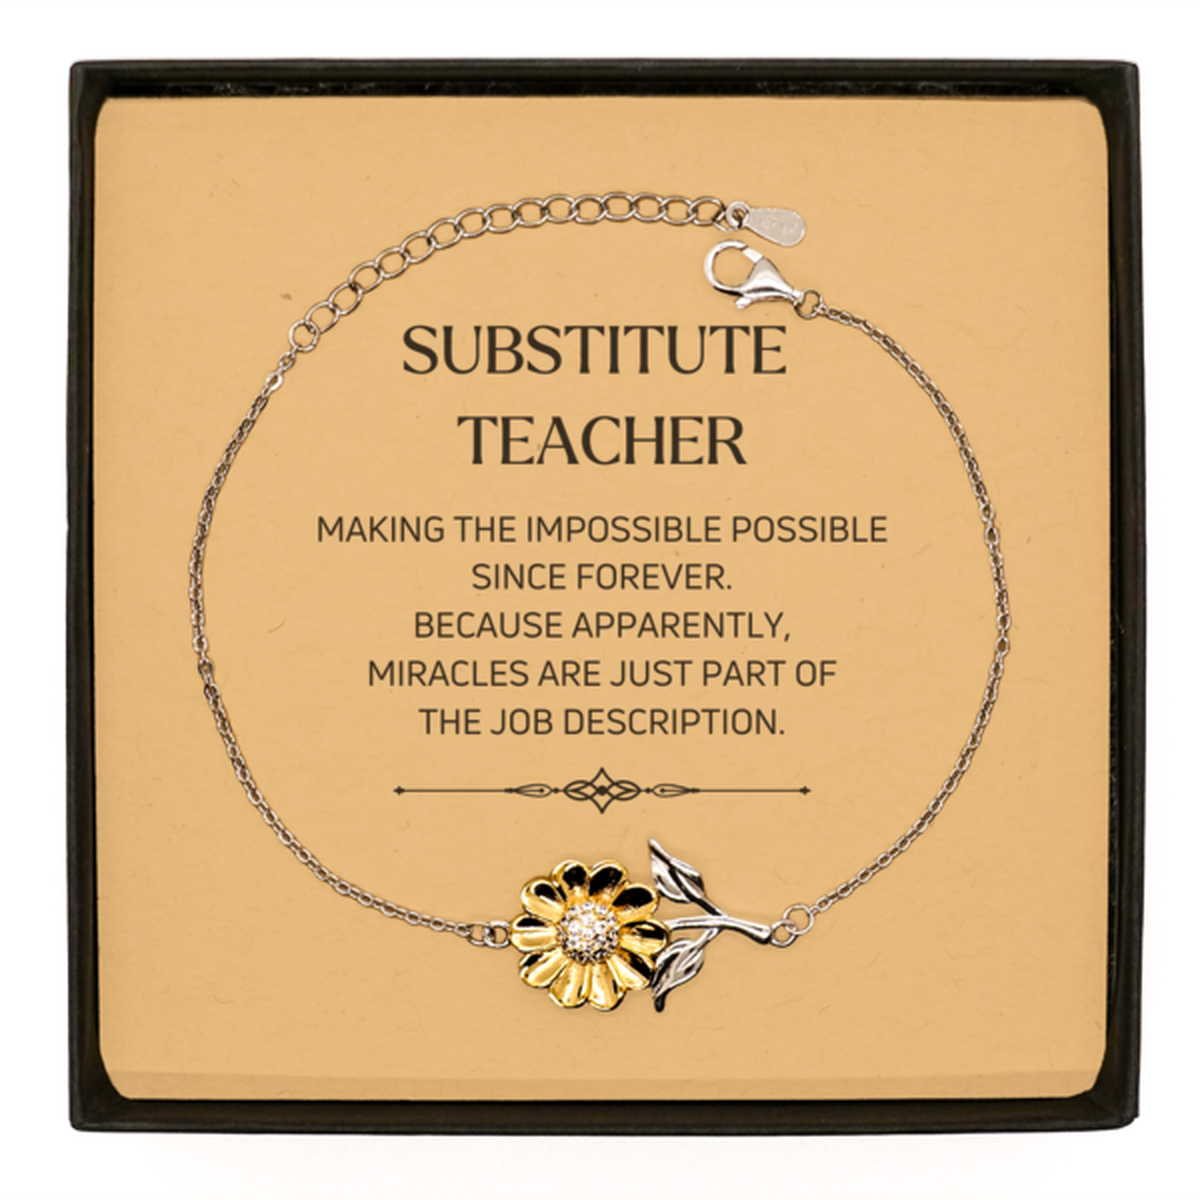 Funny Substitute Teacher Gifts, Miracles are just part of the job description, Inspirational Birthday Sunflower Bracelet For Substitute Teacher, Men, Women, Coworkers, Friends, Boss